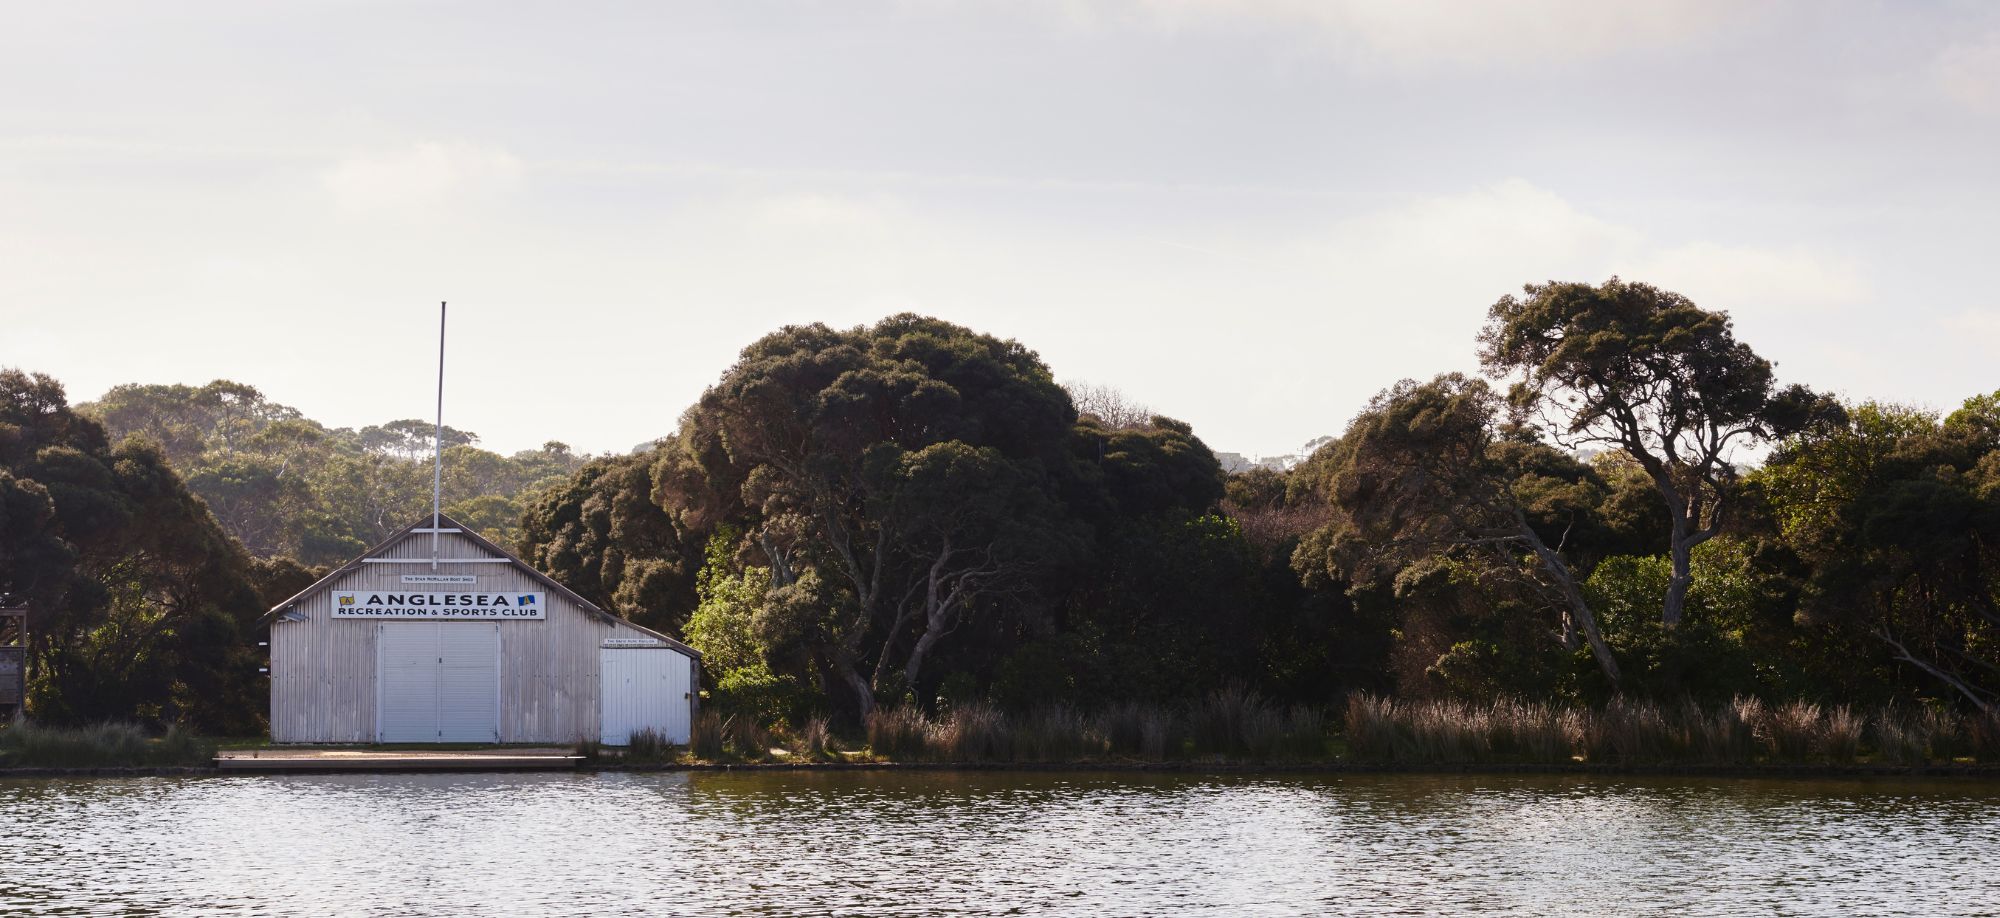 Recreation and Sports Club Boathouse in Anglesea, Victoria.